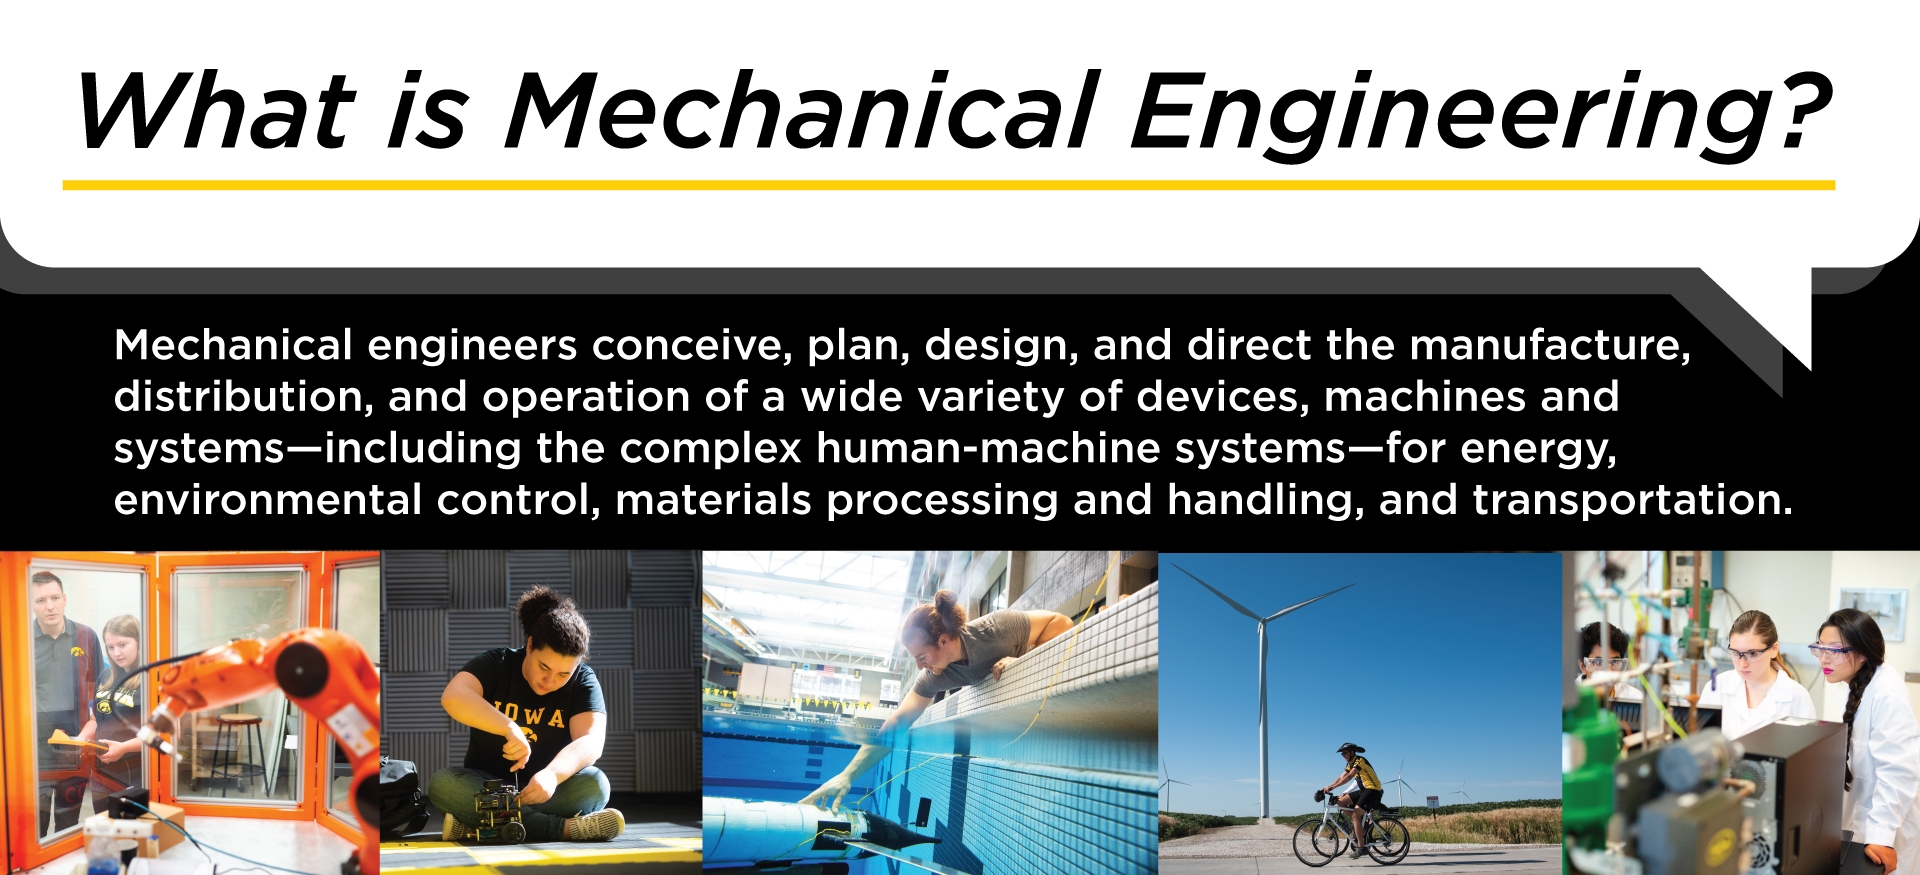 What is Mechanical Engineering